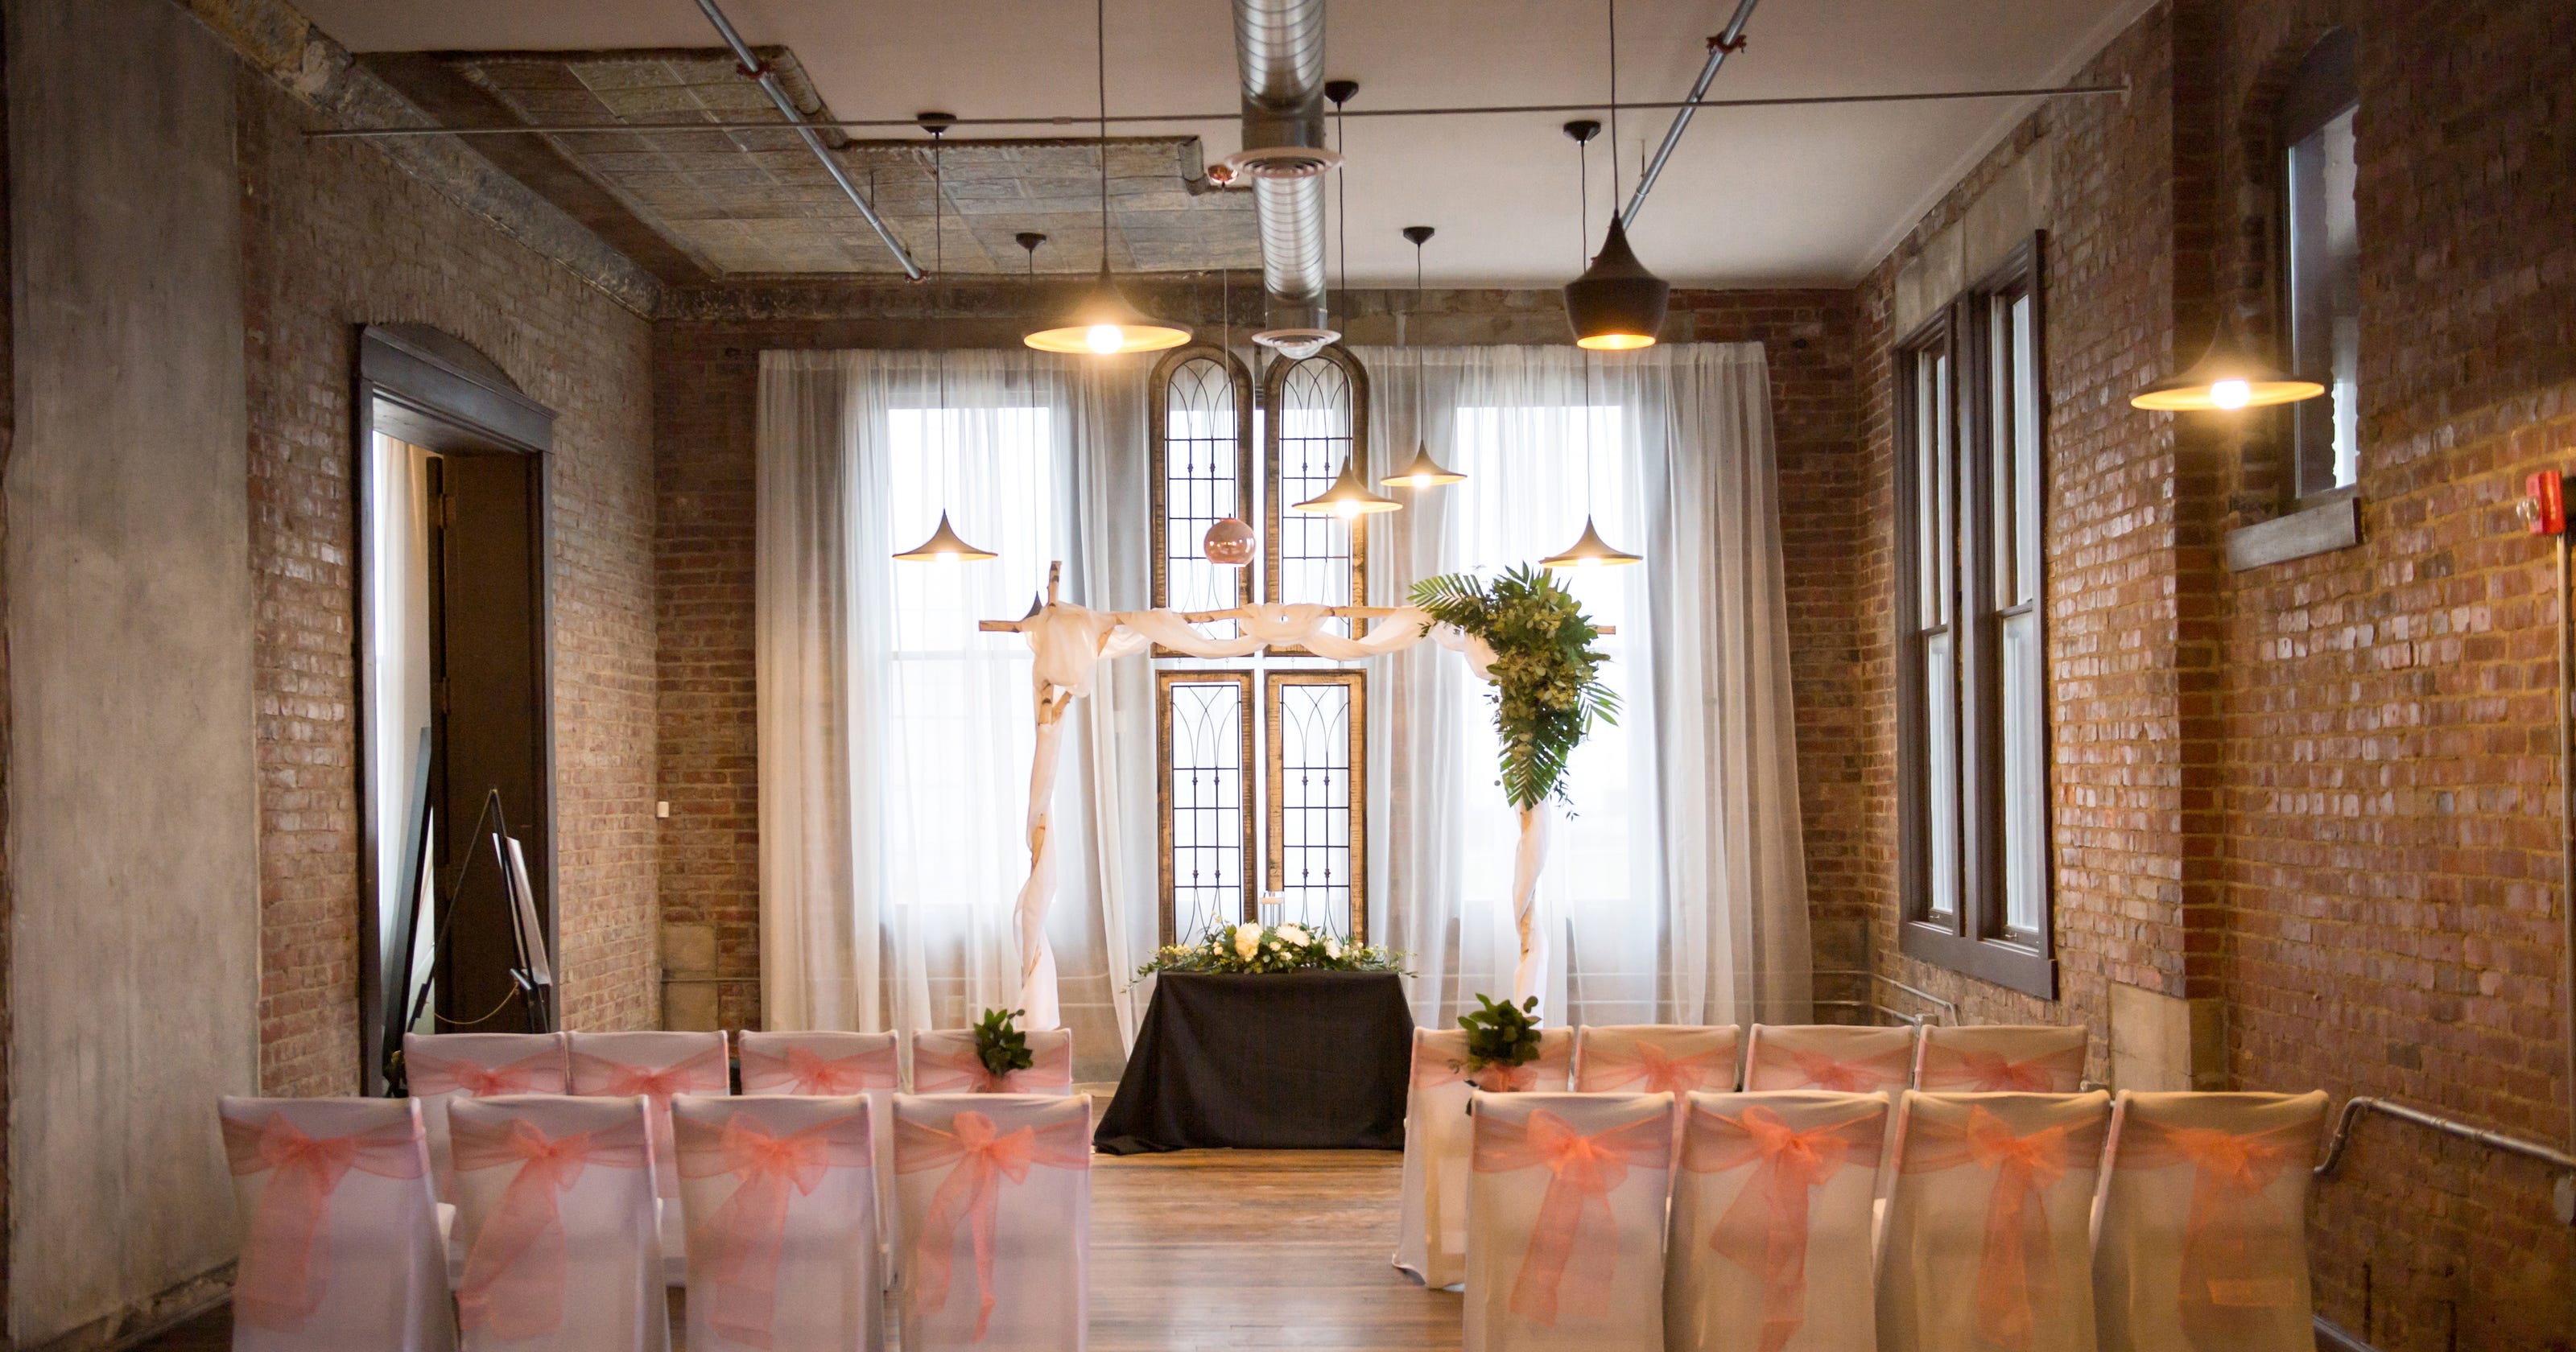 Meet These 12 New Indianapolis Event Venues